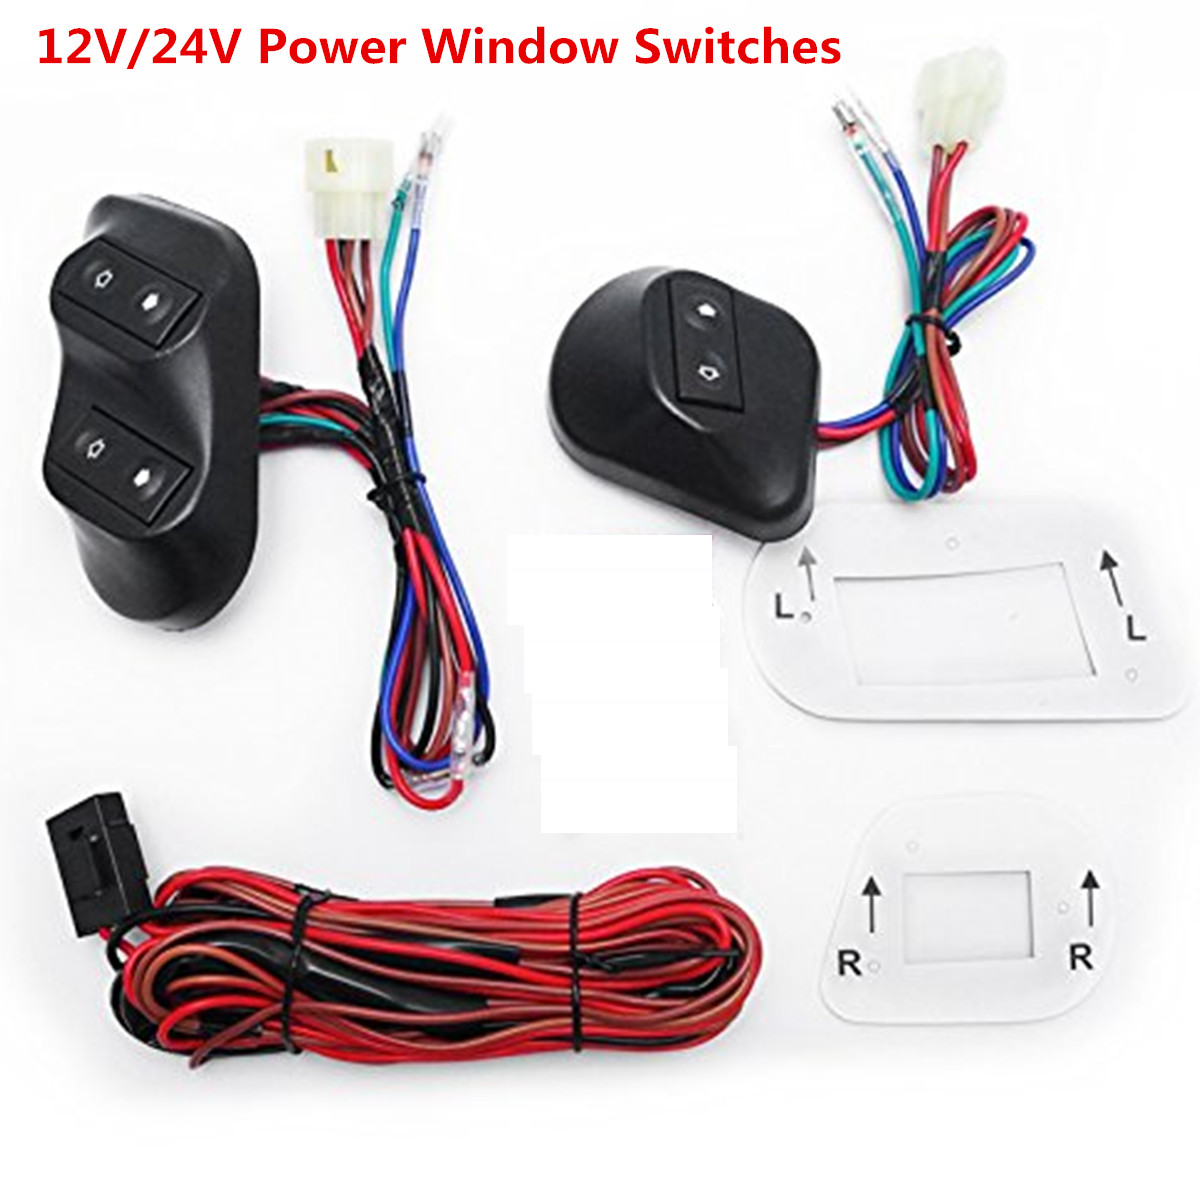 Universal 12V//24V Buttons SUV Car Power Window Switches With Holder/&Wire Harness